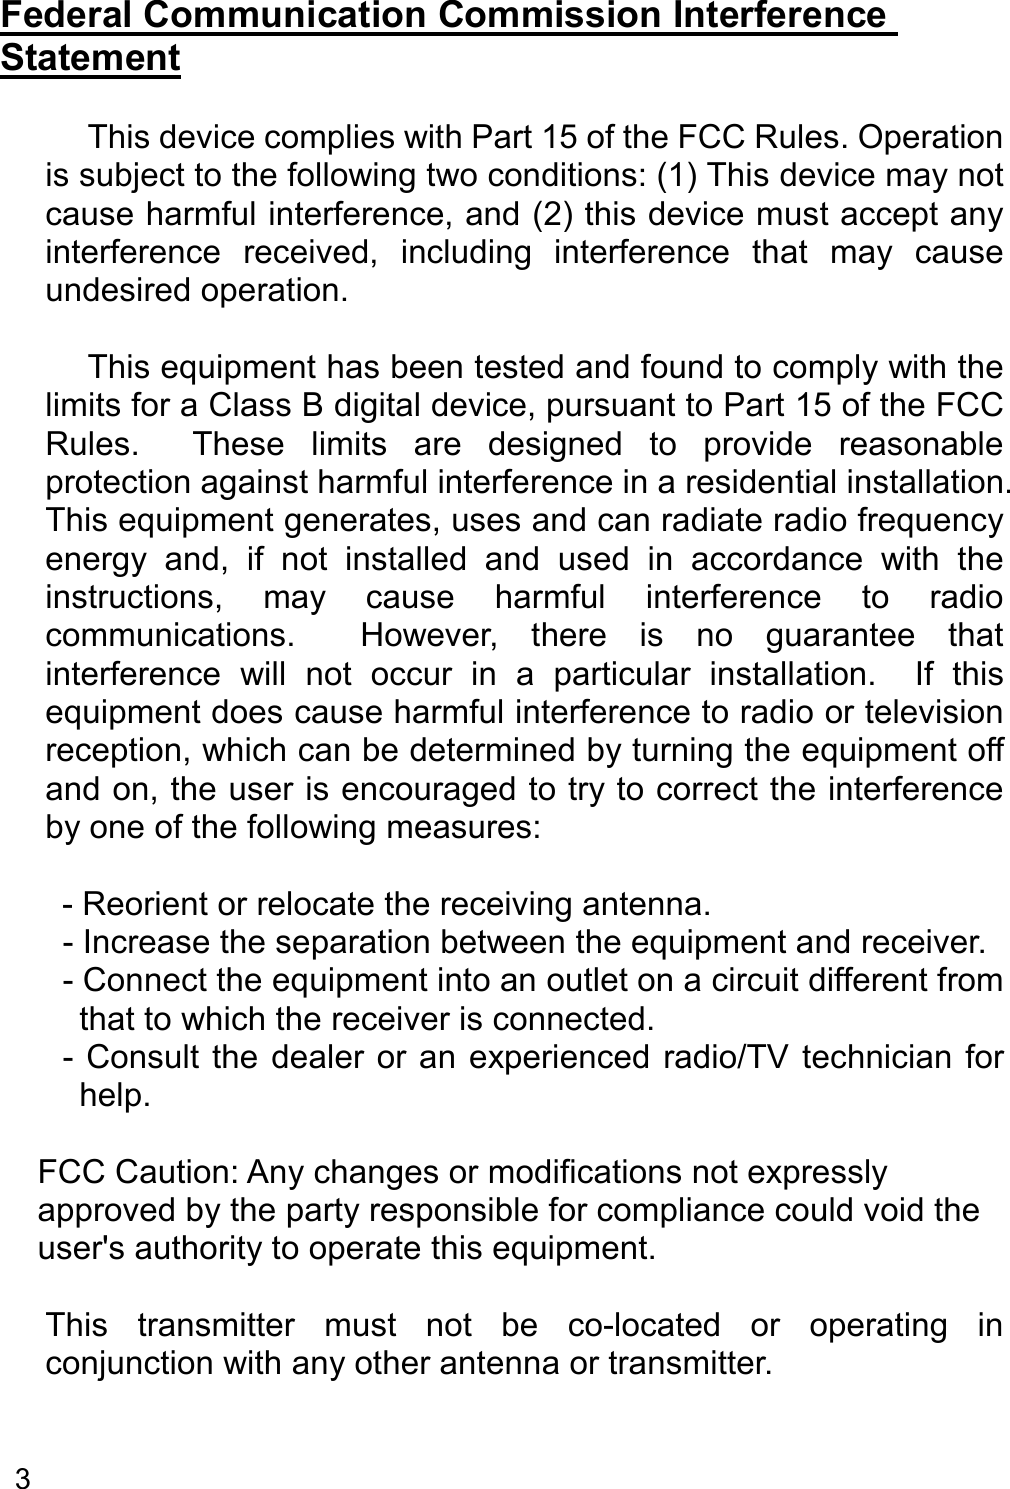   3   Federal Communication Commission Interference Statement      This device complies with Part 15 of the FCC Rules. Operation is subject to the following two conditions: (1) This device may not cause harmful interference, and (2) this device must accept any interference  received,  including  interference  that  may  cause undesired operation.      This equipment has been tested and found to comply with the limits for a Class B digital device, pursuant to Part 15 of the FCC Rules.    These  limits  are  designed  to  provide  reasonable protection against harmful interference in a residential installation. This equipment generates, uses and can radiate radio frequency energy  and,  if  not  installed  and  used  in  accordance  with  the instructions,  may  cause  harmful  interference  to  radio communications.    However,  there  is  no  guarantee  that interference  will  not  occur  in  a  particular  installation.    If  this equipment does cause harmful interference to radio or television reception, which can be determined by turning the equipment off and on, the user is encouraged to try to correct the interference by one of the following measures:    - Reorient or relocate the receiving antenna. - Increase the separation between the equipment and receiver. - Connect the equipment into an outlet on a circuit different from that to which the receiver is connected. - Consult  the  dealer or an experienced radio/TV technician  for help.    FCC Caution: Any changes or modifications not expressly approved by the party responsible for compliance could void the user&apos;s authority to operate this equipment.    This  transmitter  must  not  be  co-located  or  operating  in conjunction with any other antenna or transmitter.   